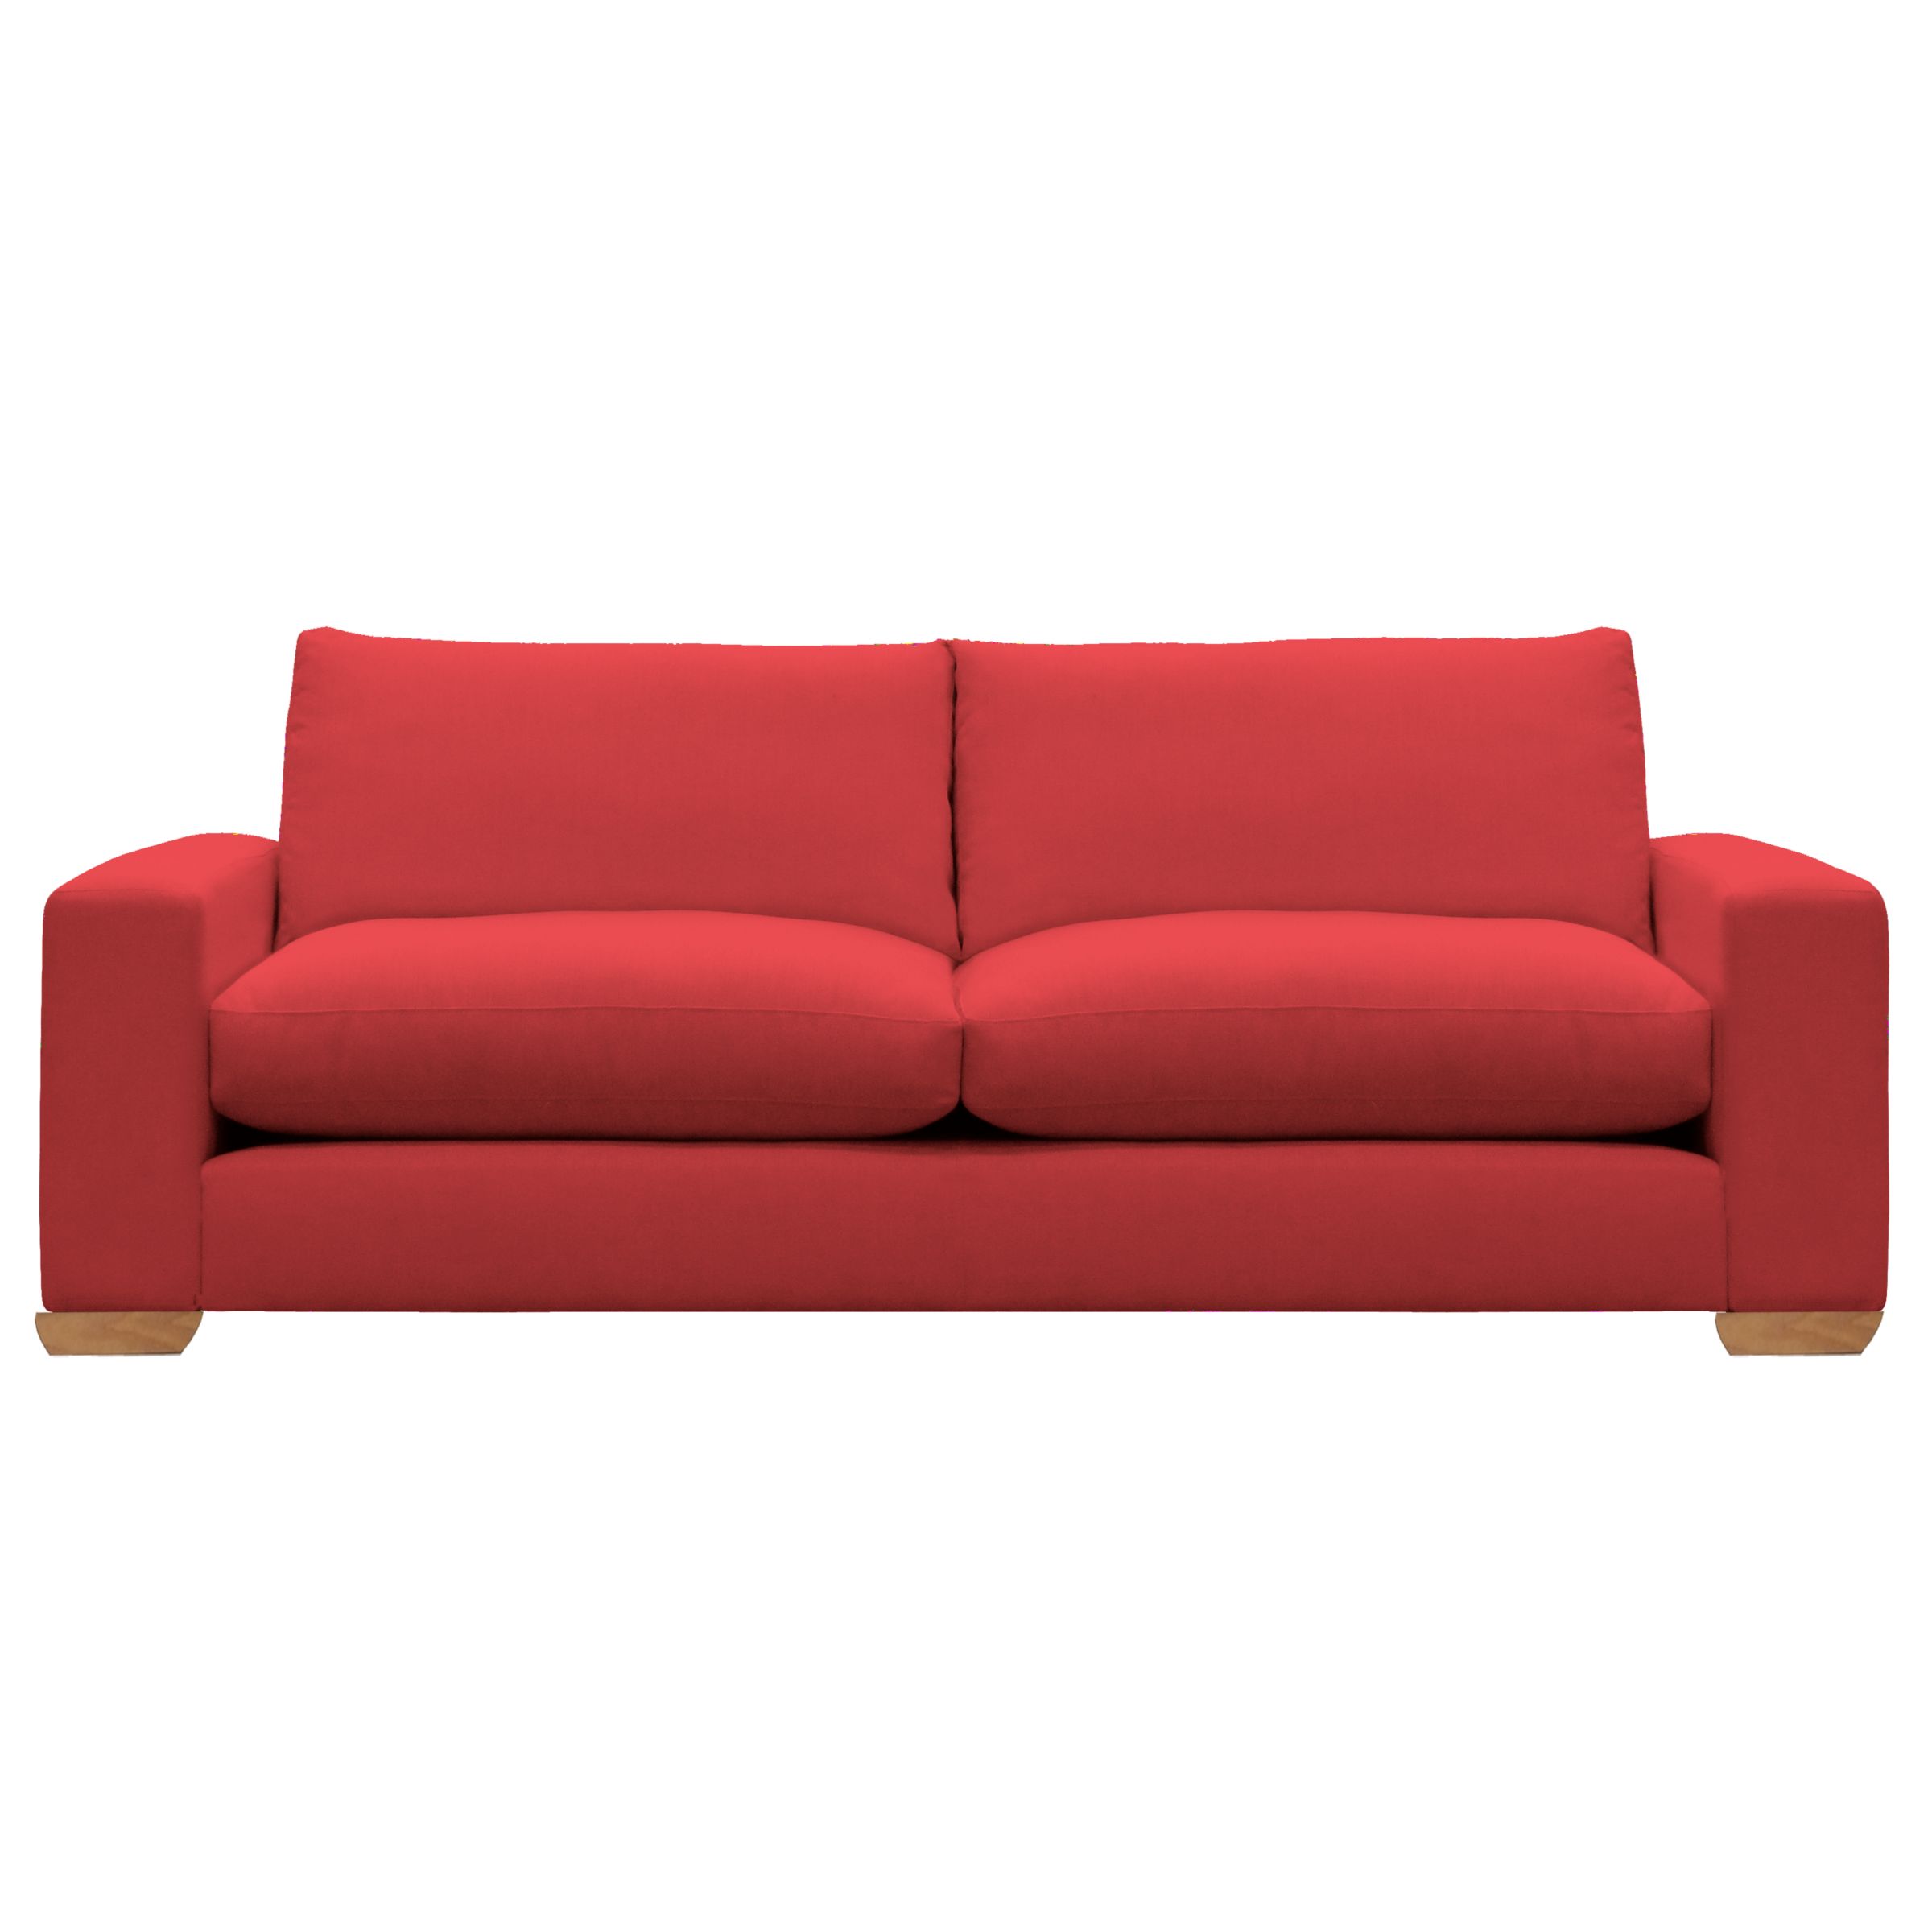 John Lewis Options Wide Arm Grand Sofa, Linley Red, width 225cm